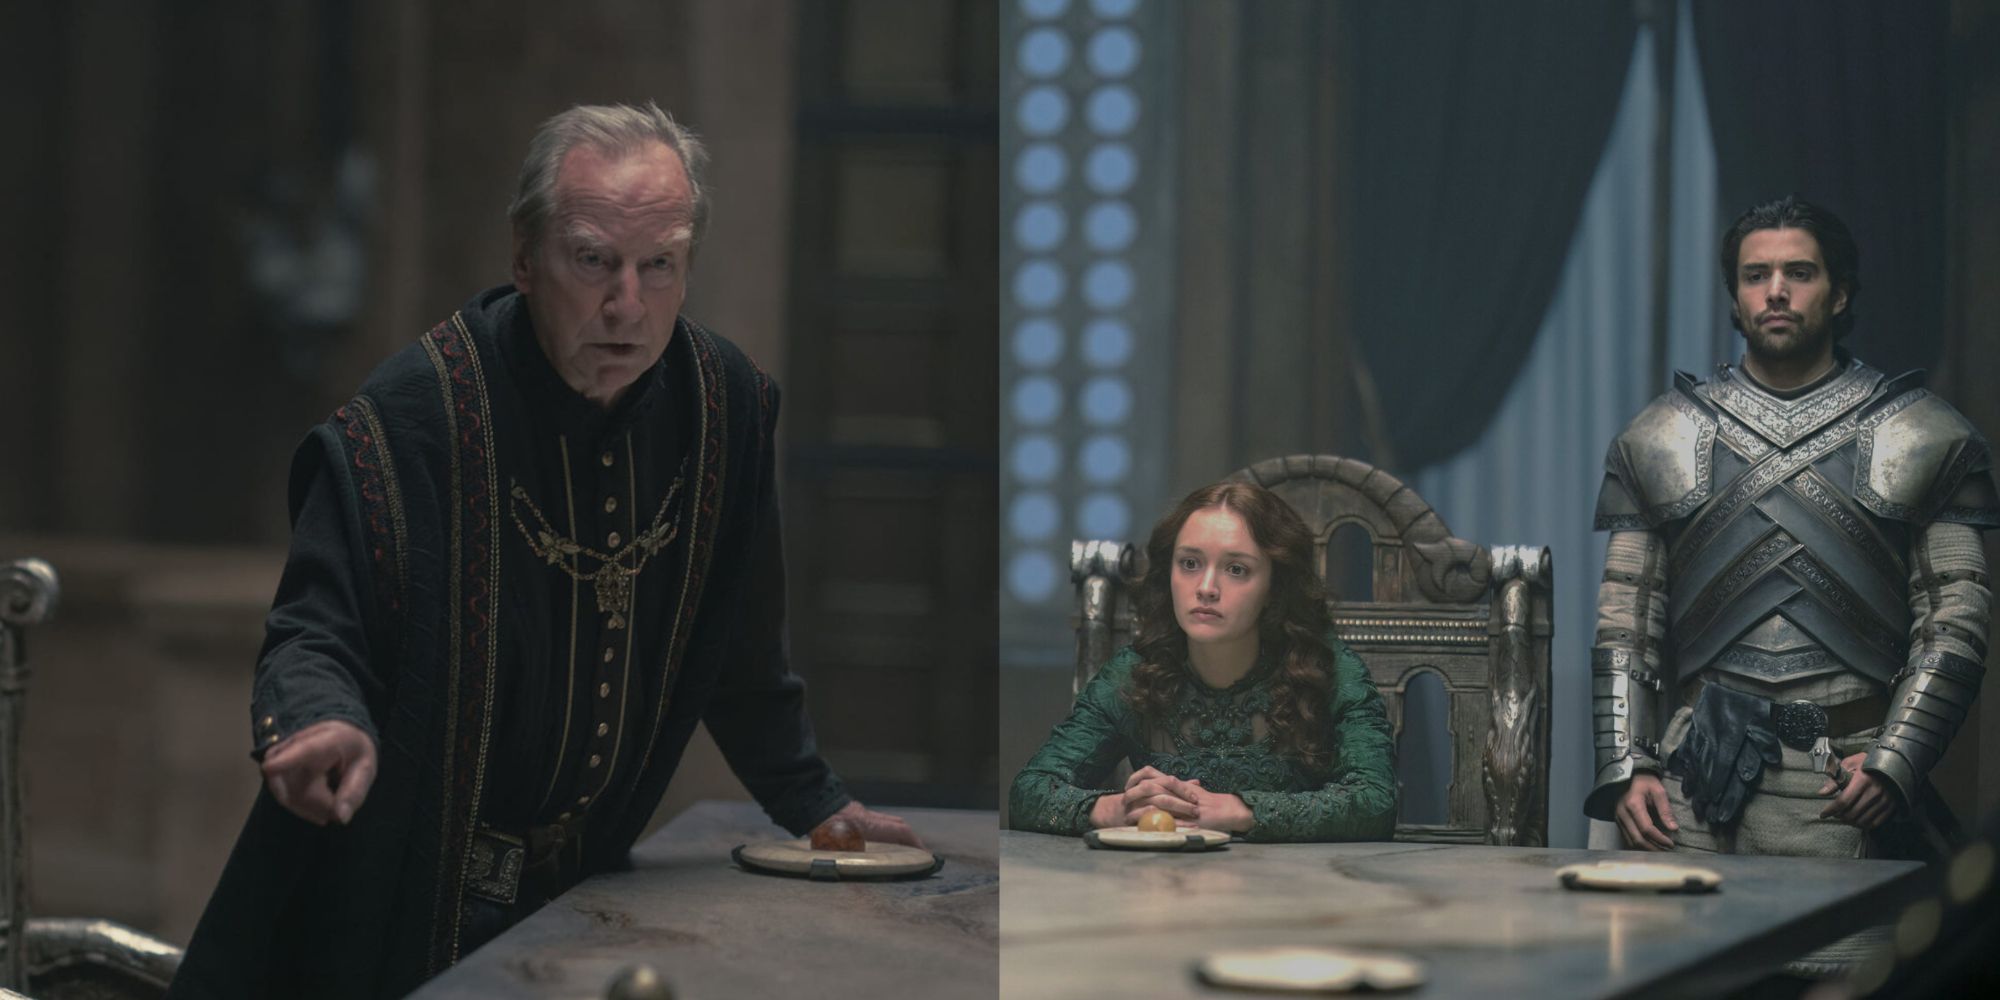 Split image of HOTD's Small Council and Alicent Hightower